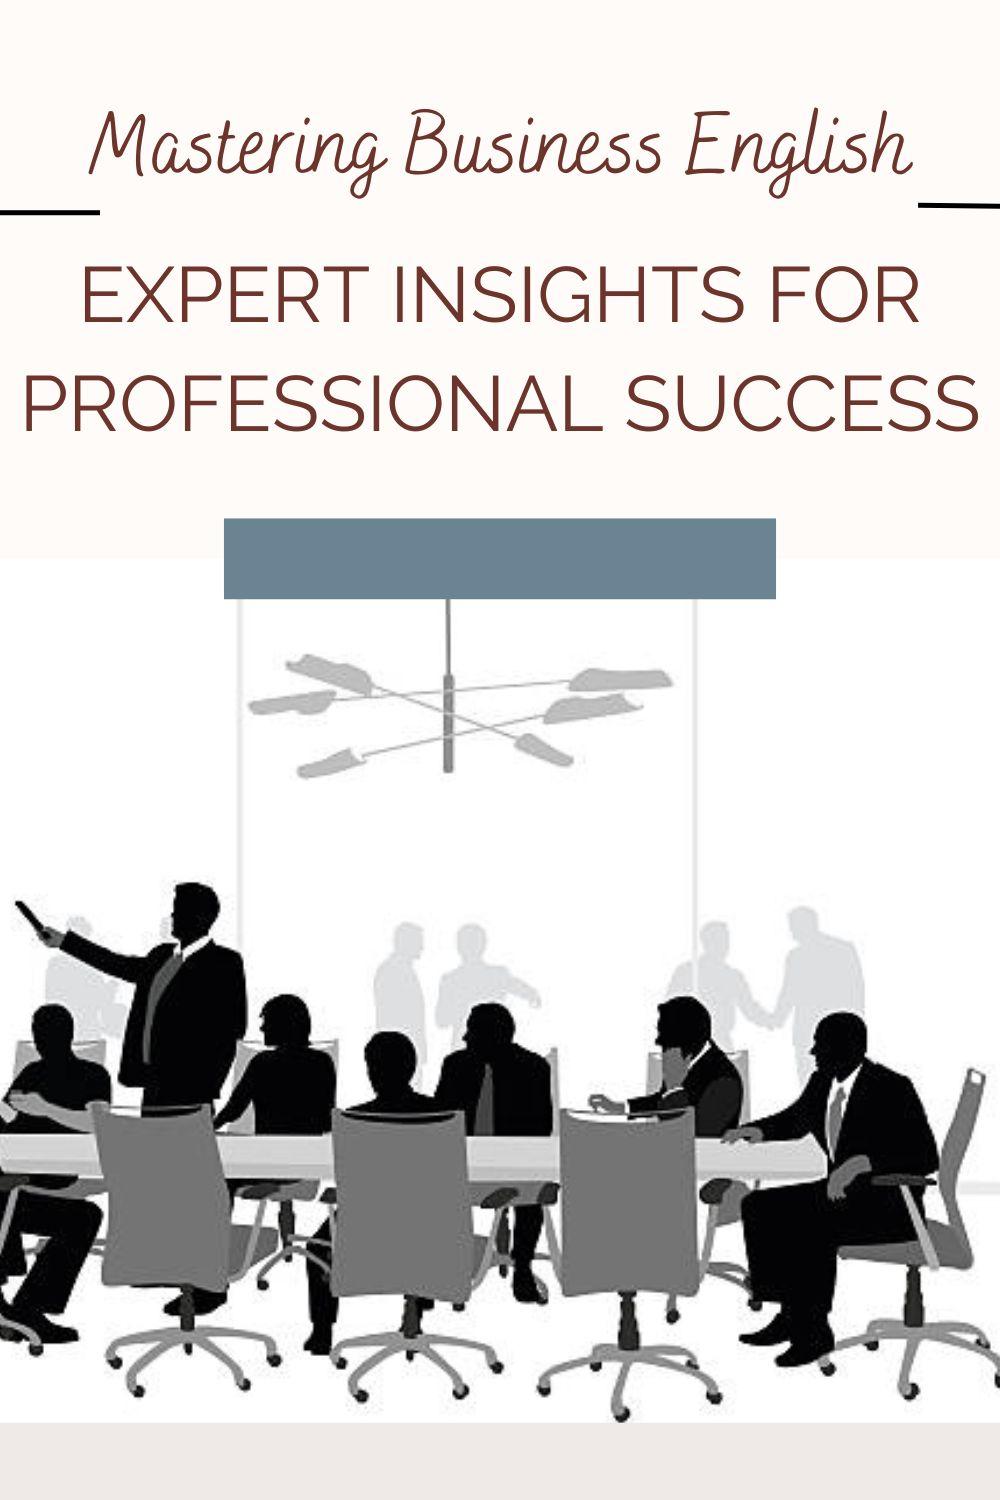 Mastering Business English: Expert Insights for Professional Success